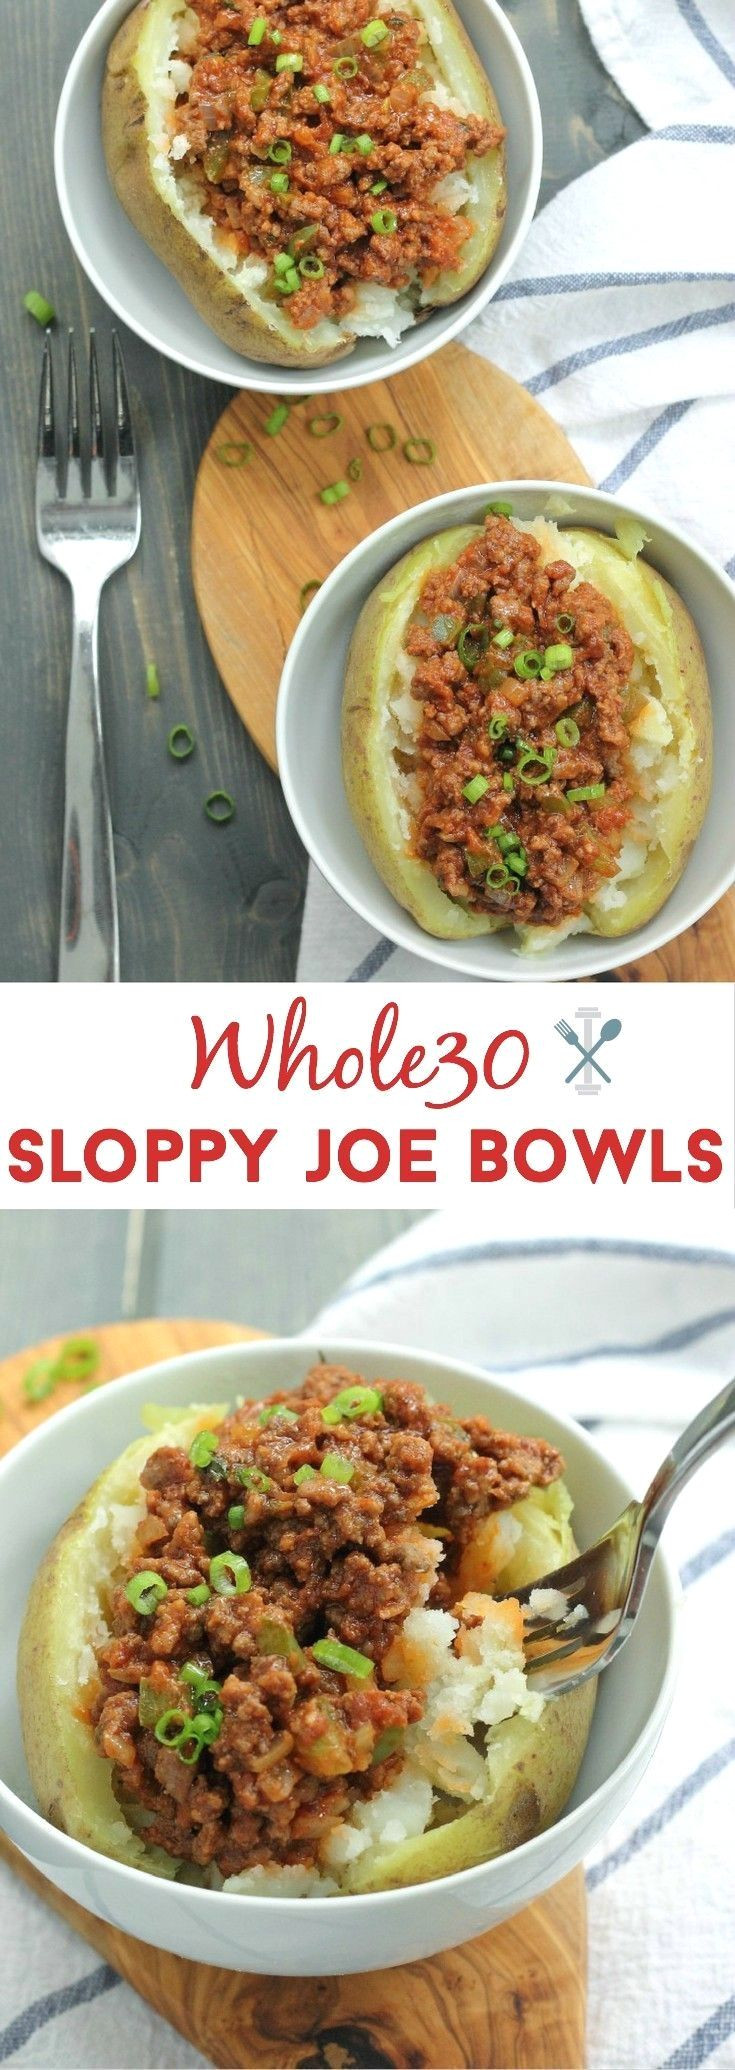 Kid Friendly Whole30 Recipes
 A delicious and kid friendly recipe on a classic these